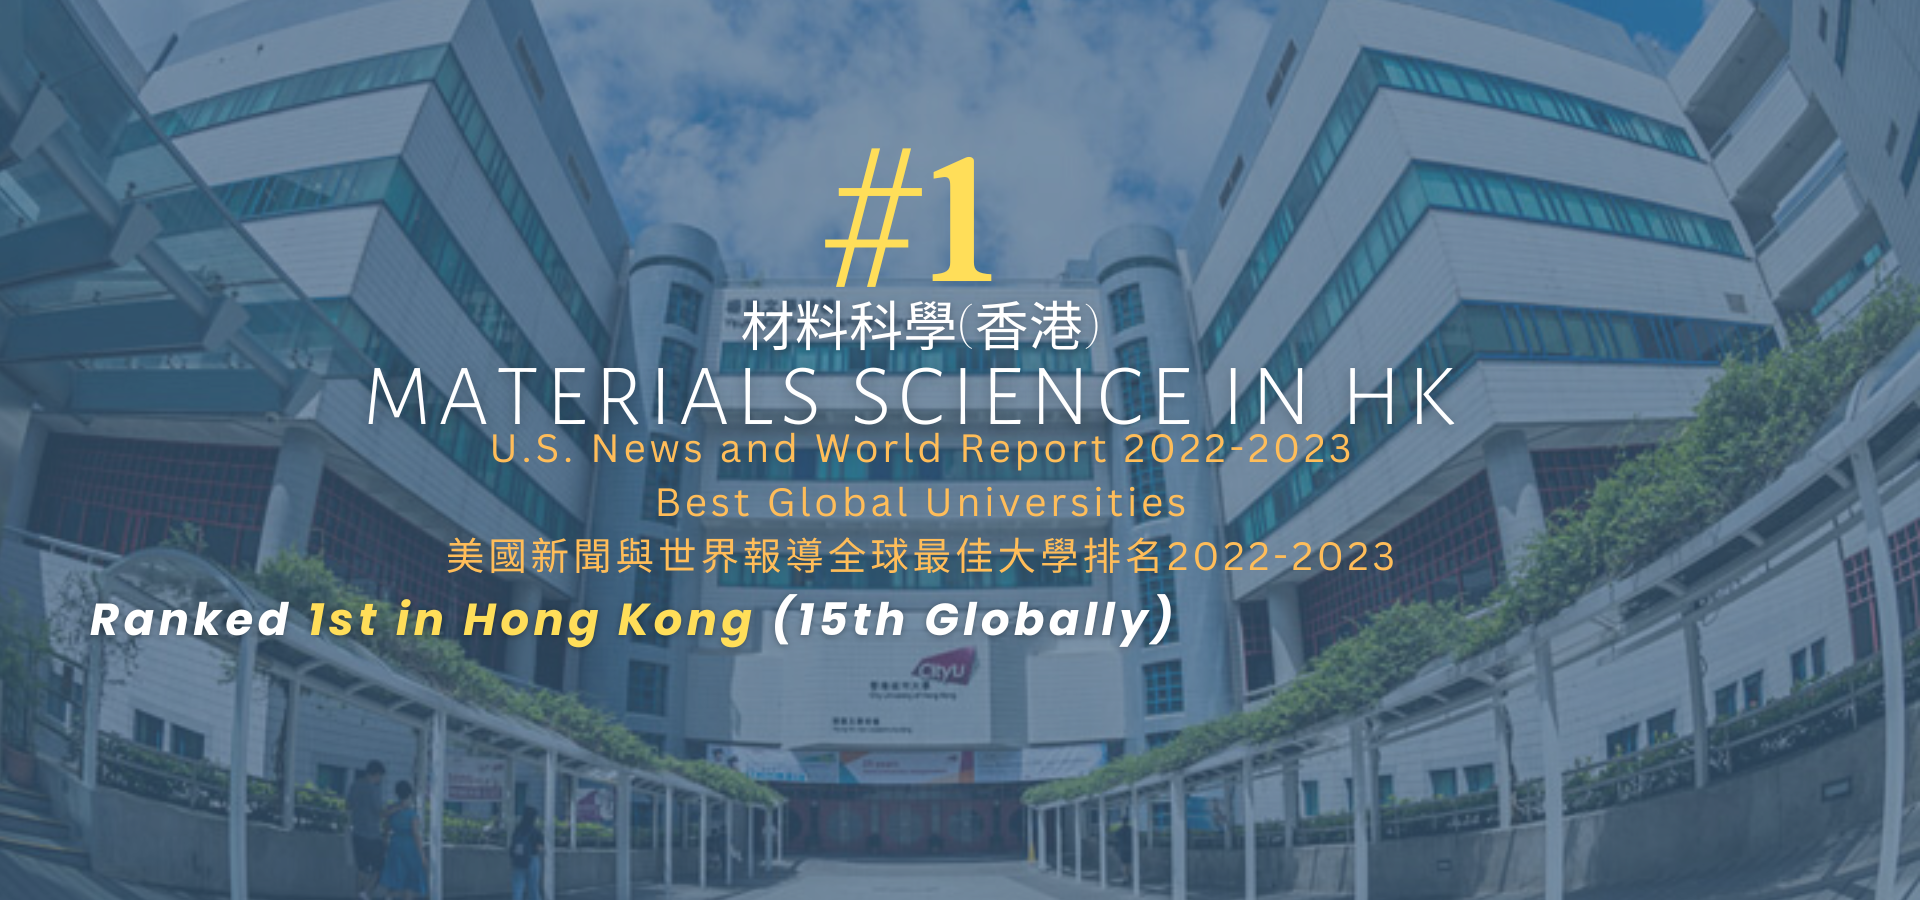 CityU Ranked No. 1 in Hong Kong in the U.S. News & World Report Best Global Universities in Materials Science